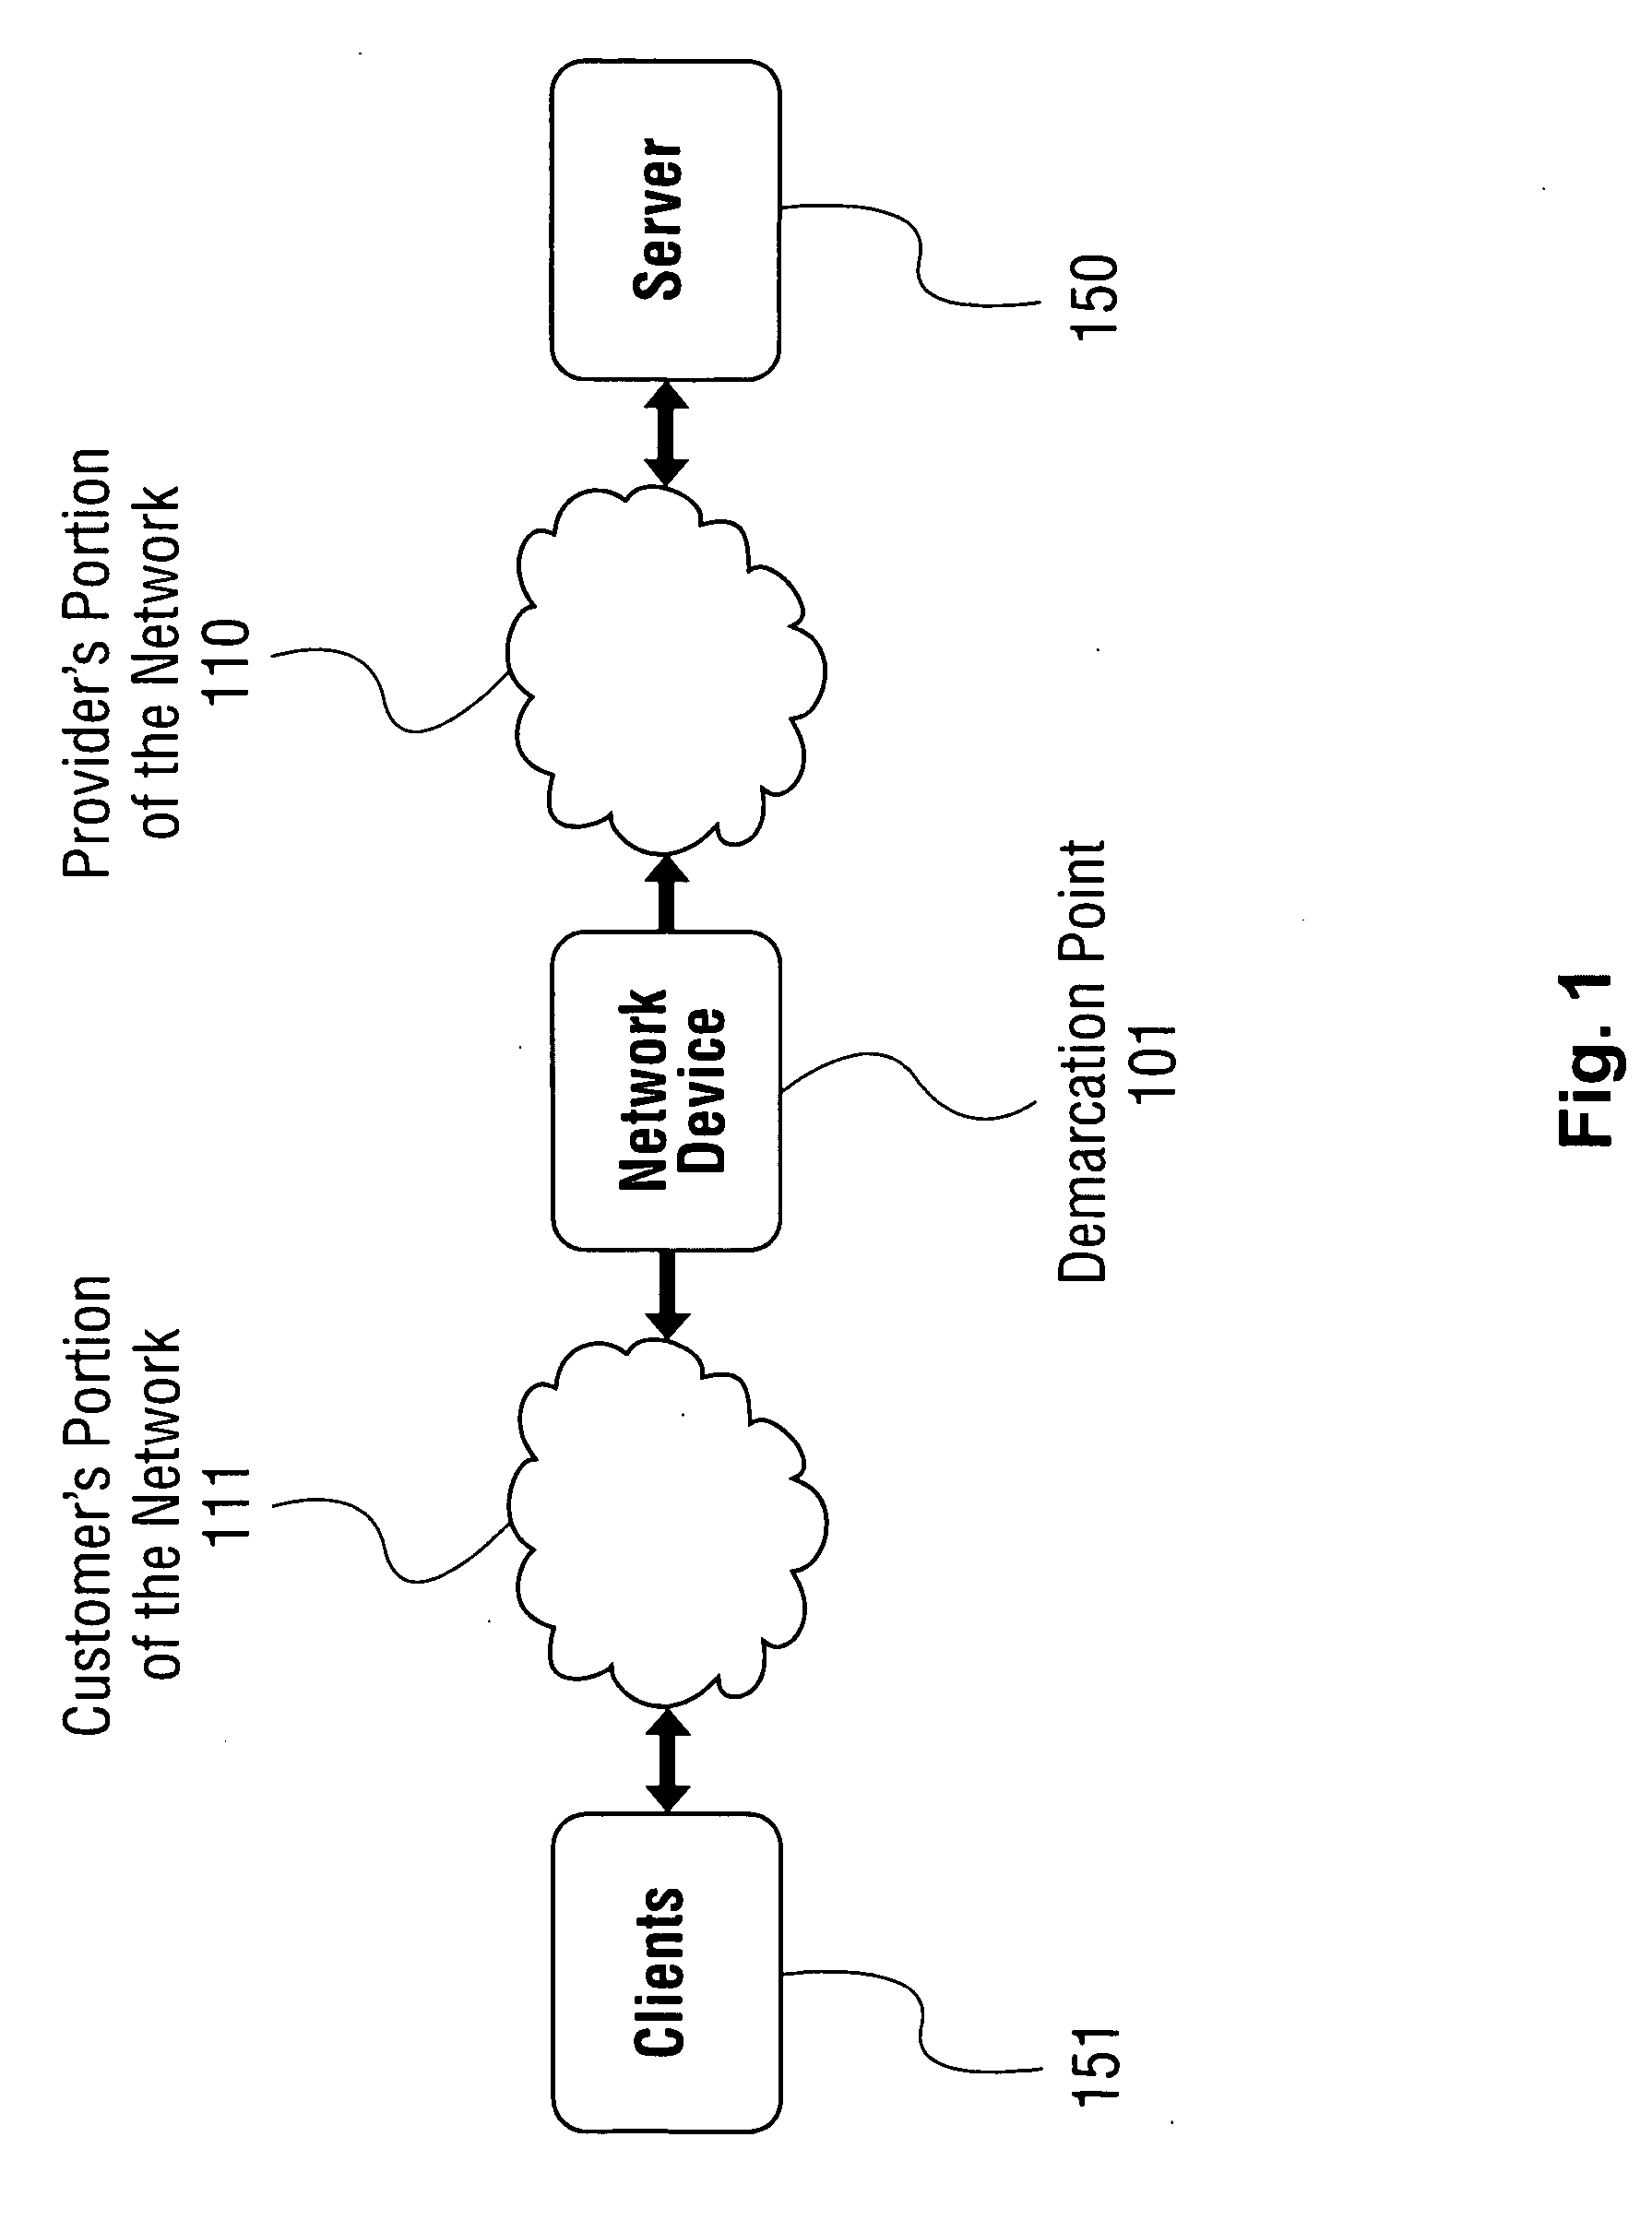 Application service level mediation and method of using the same